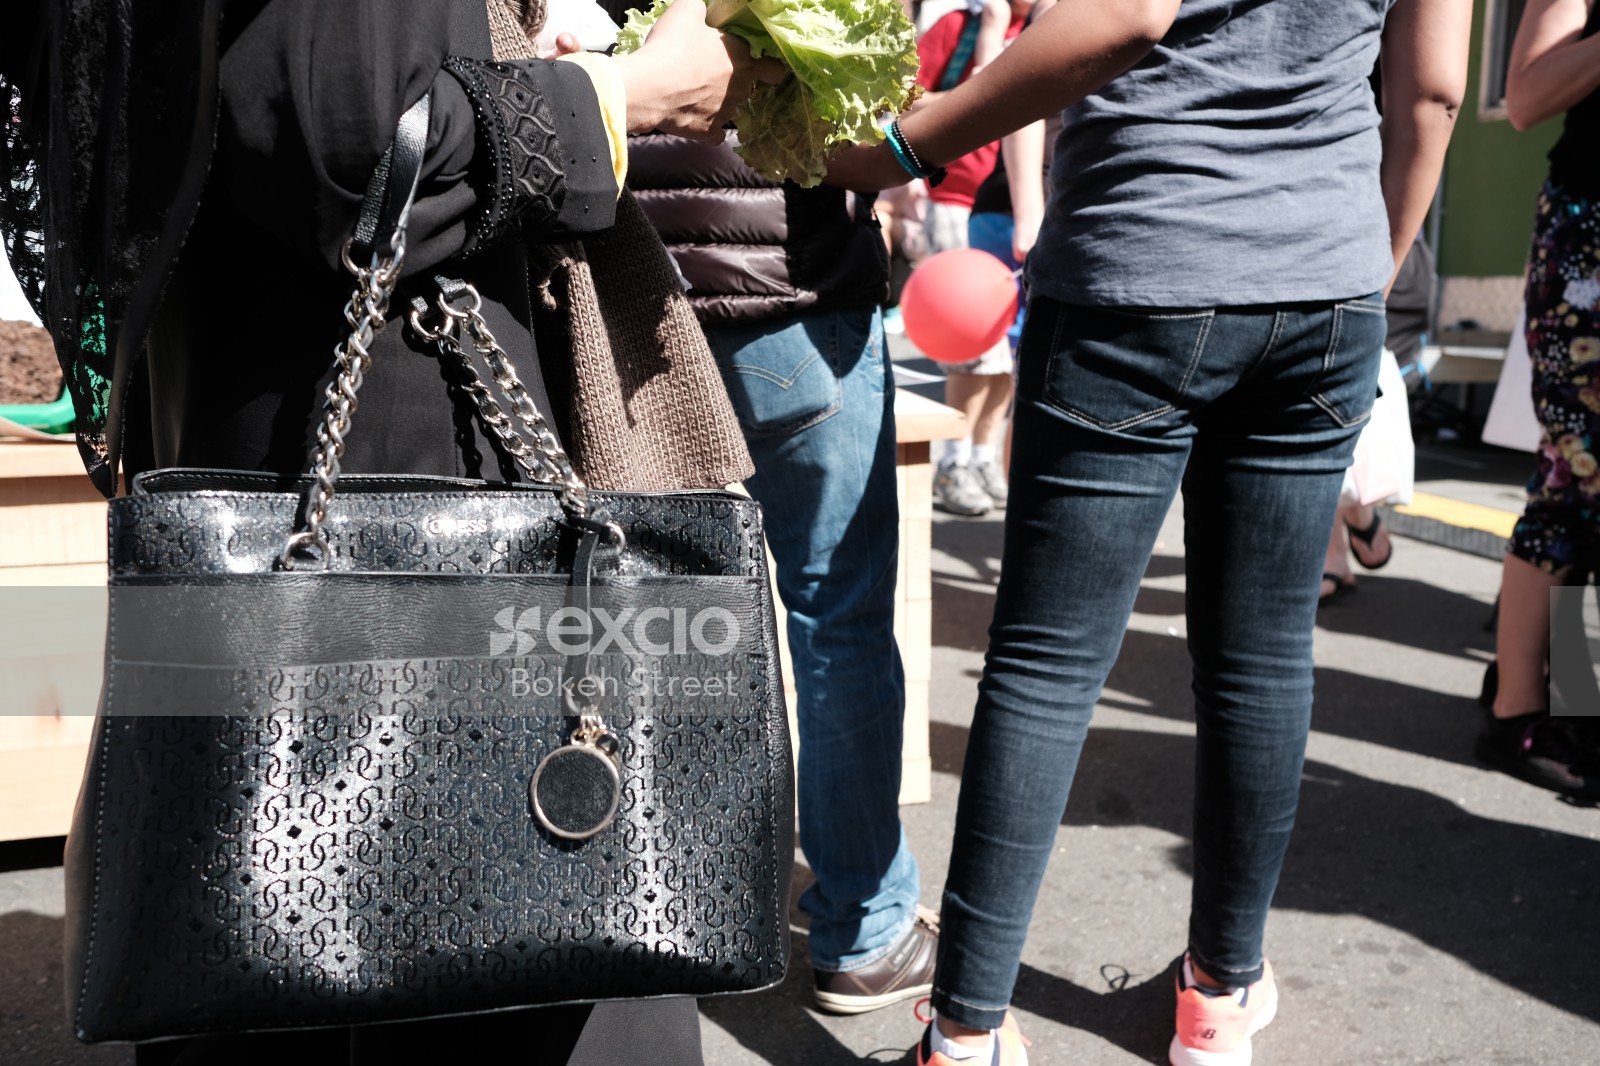 Woman carrying a handbag and salad leaves at Newtown festival 2021